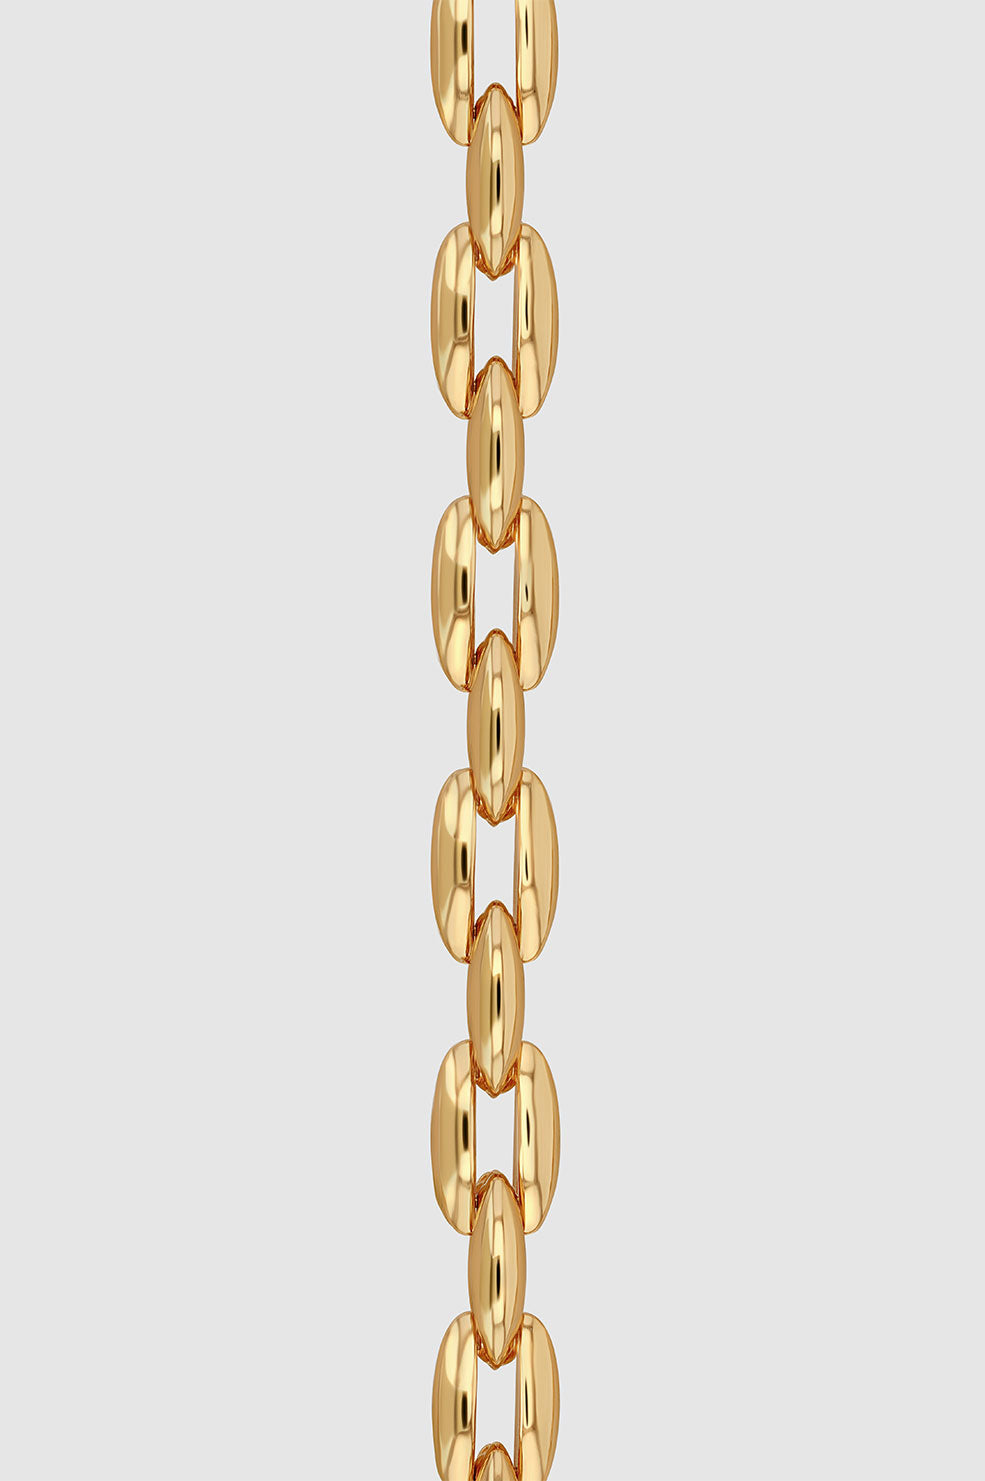 Oval Link Chain Gold / 16